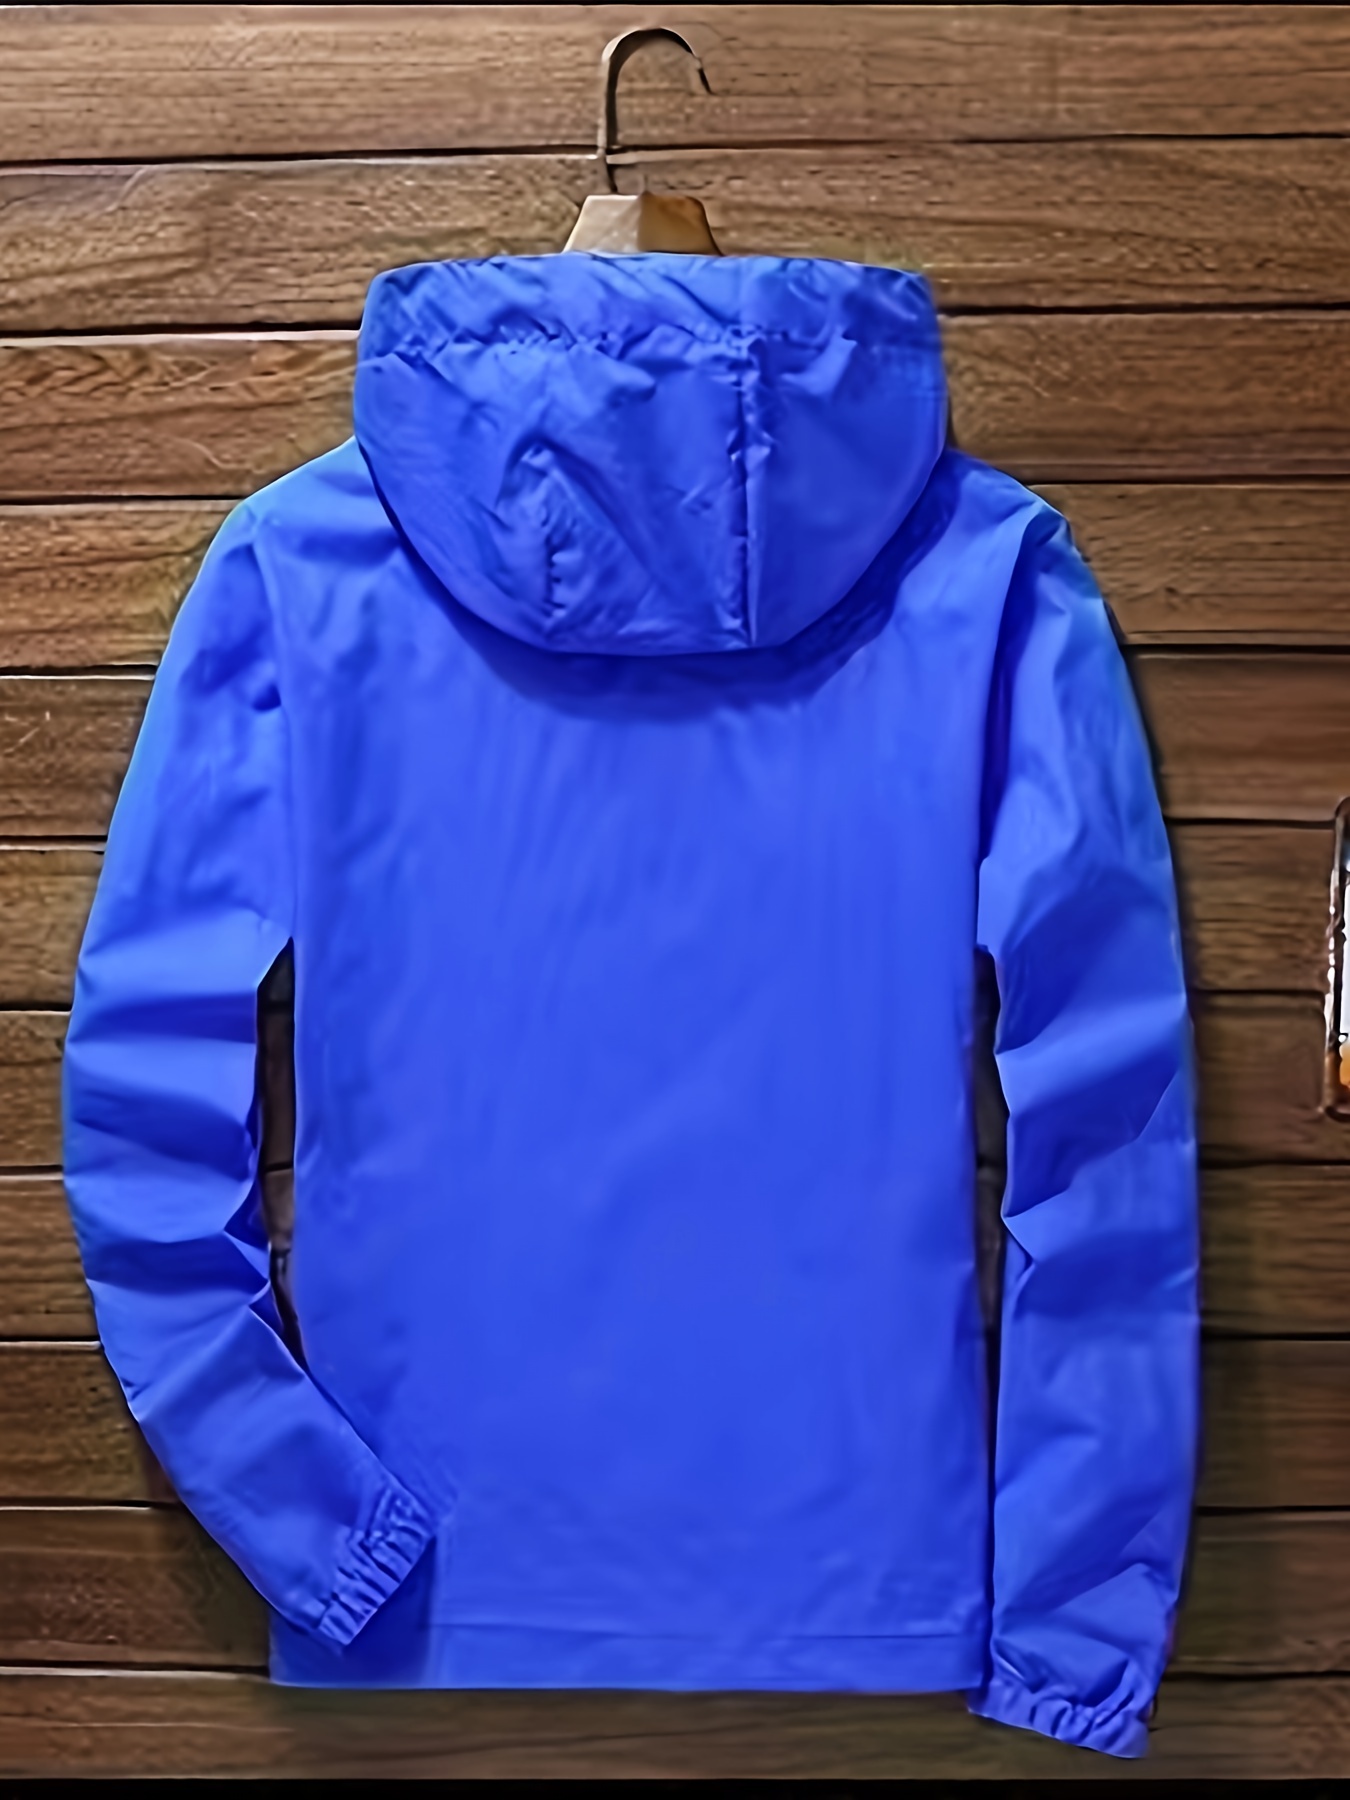 Men's Outdoor Sun Protection Breathable Quick-drying Windbreaker Hooded  Jacket